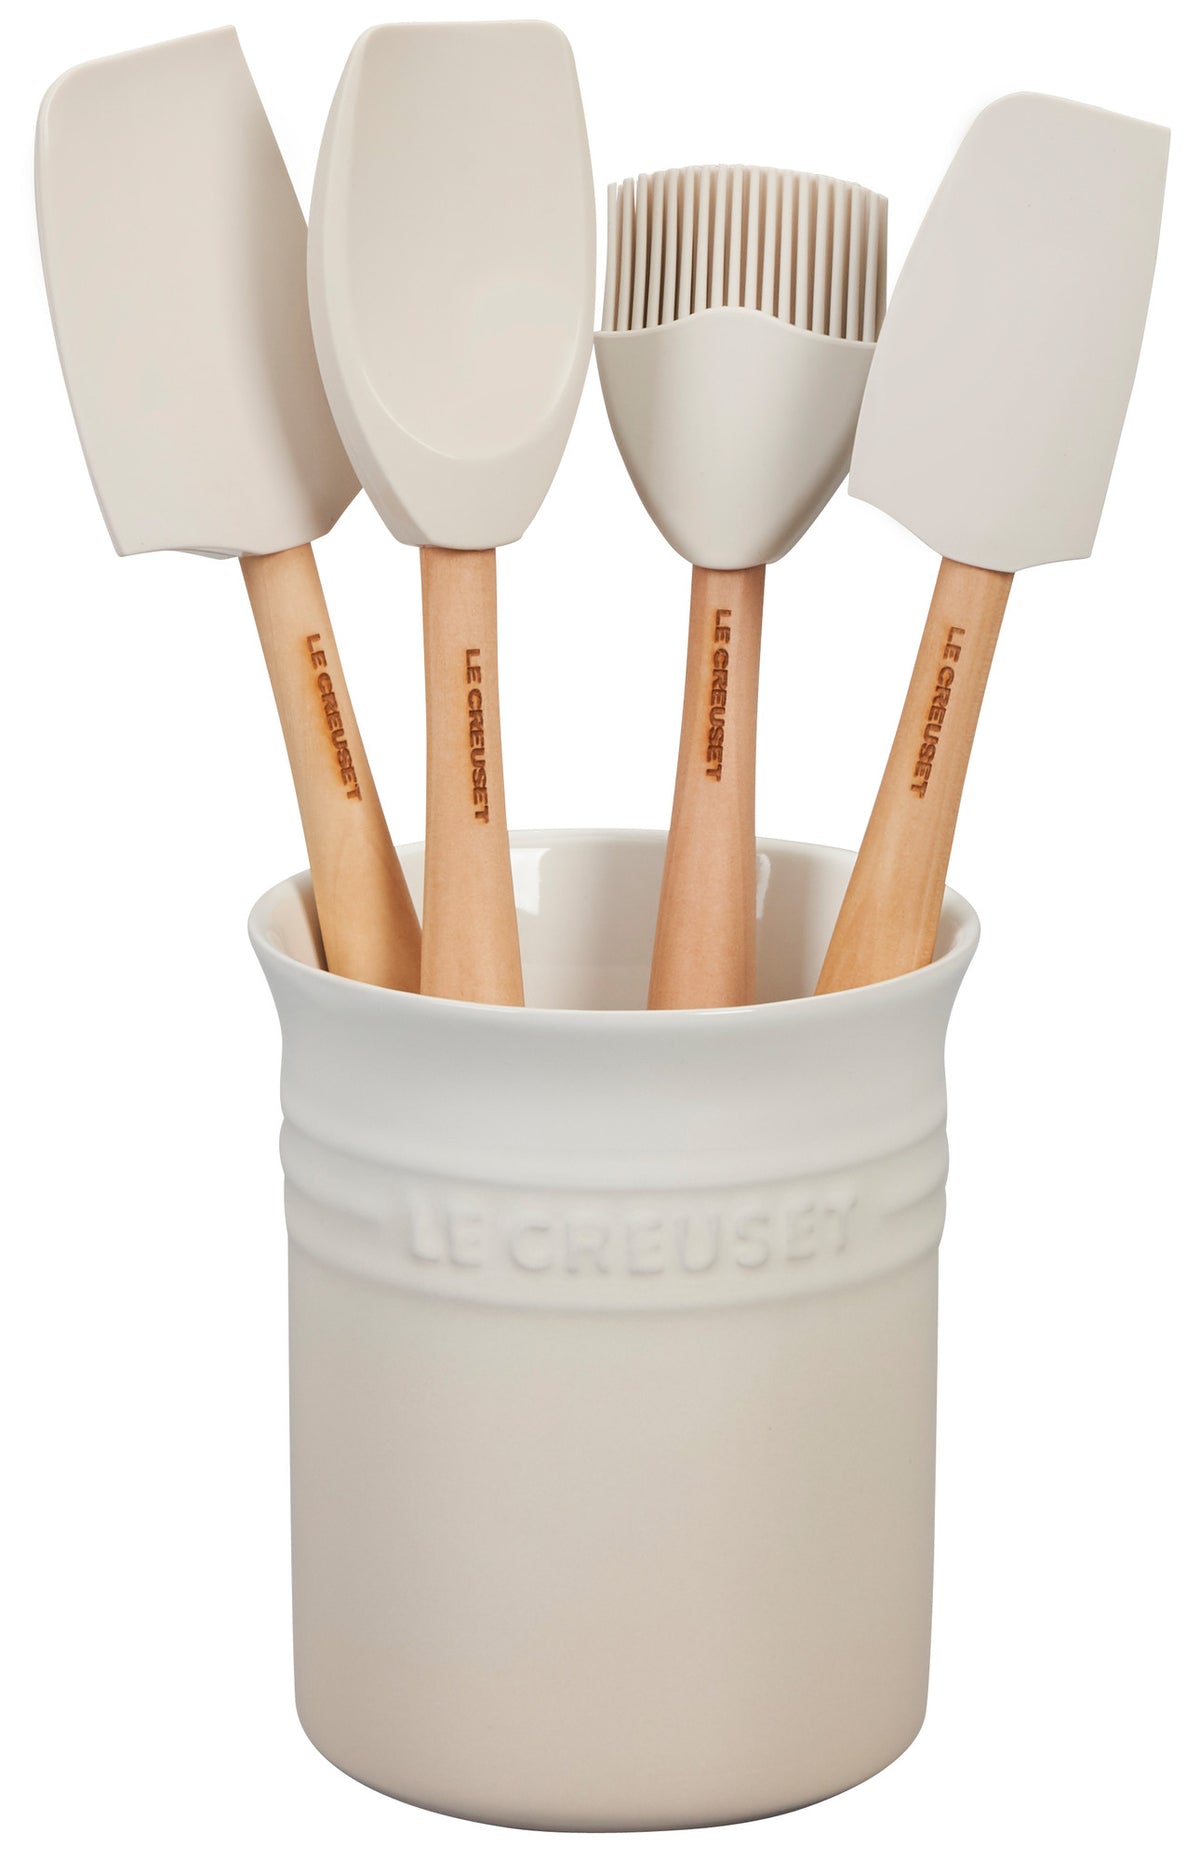 Craft Series 5 Piece Utensil Set With Crock By Le Creuset – Bella